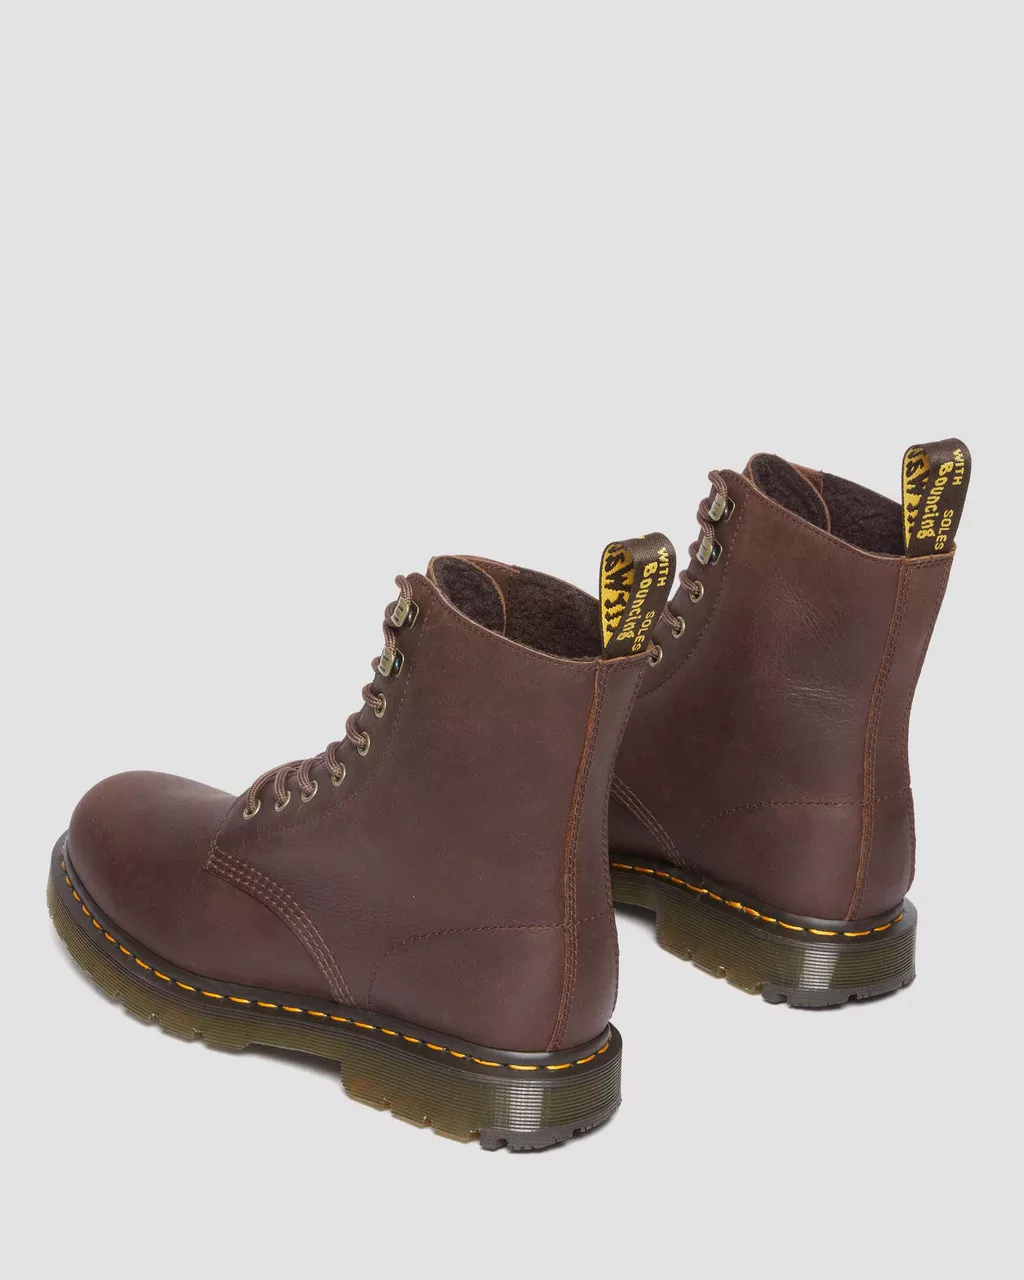 Dr. Martens - 1460 PASCAL WINTERGRIP - Chocolate Brown (Outlaw WP)